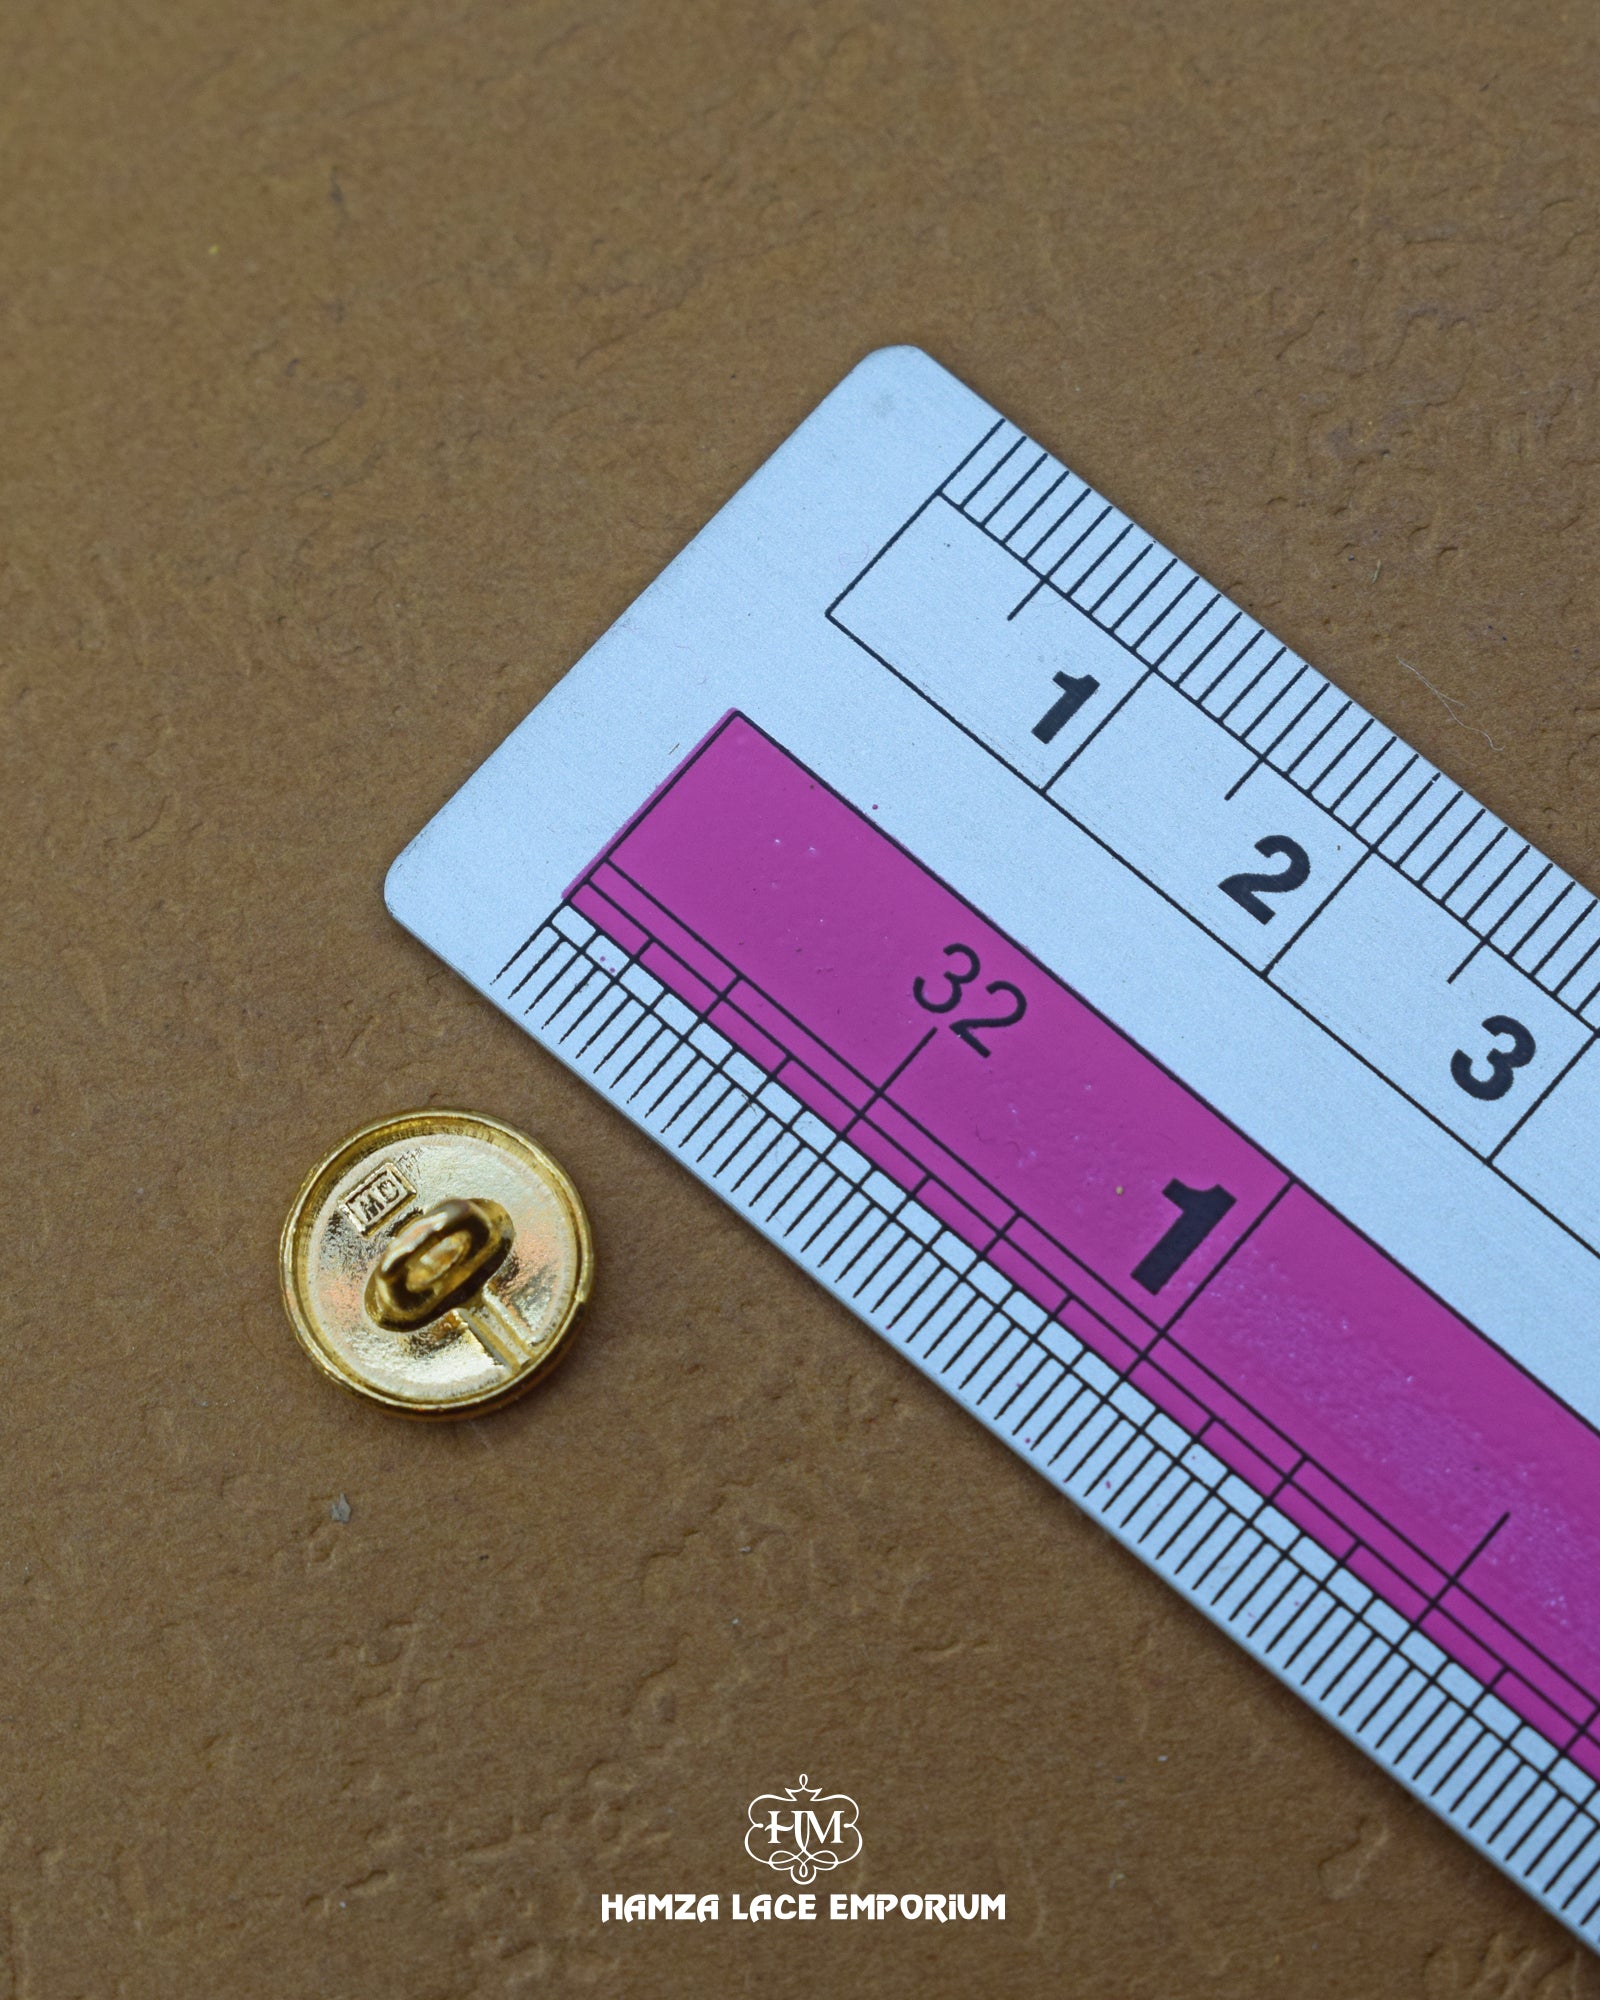 The size of the 'Golden Metal Button MB764' is measured using a ruler